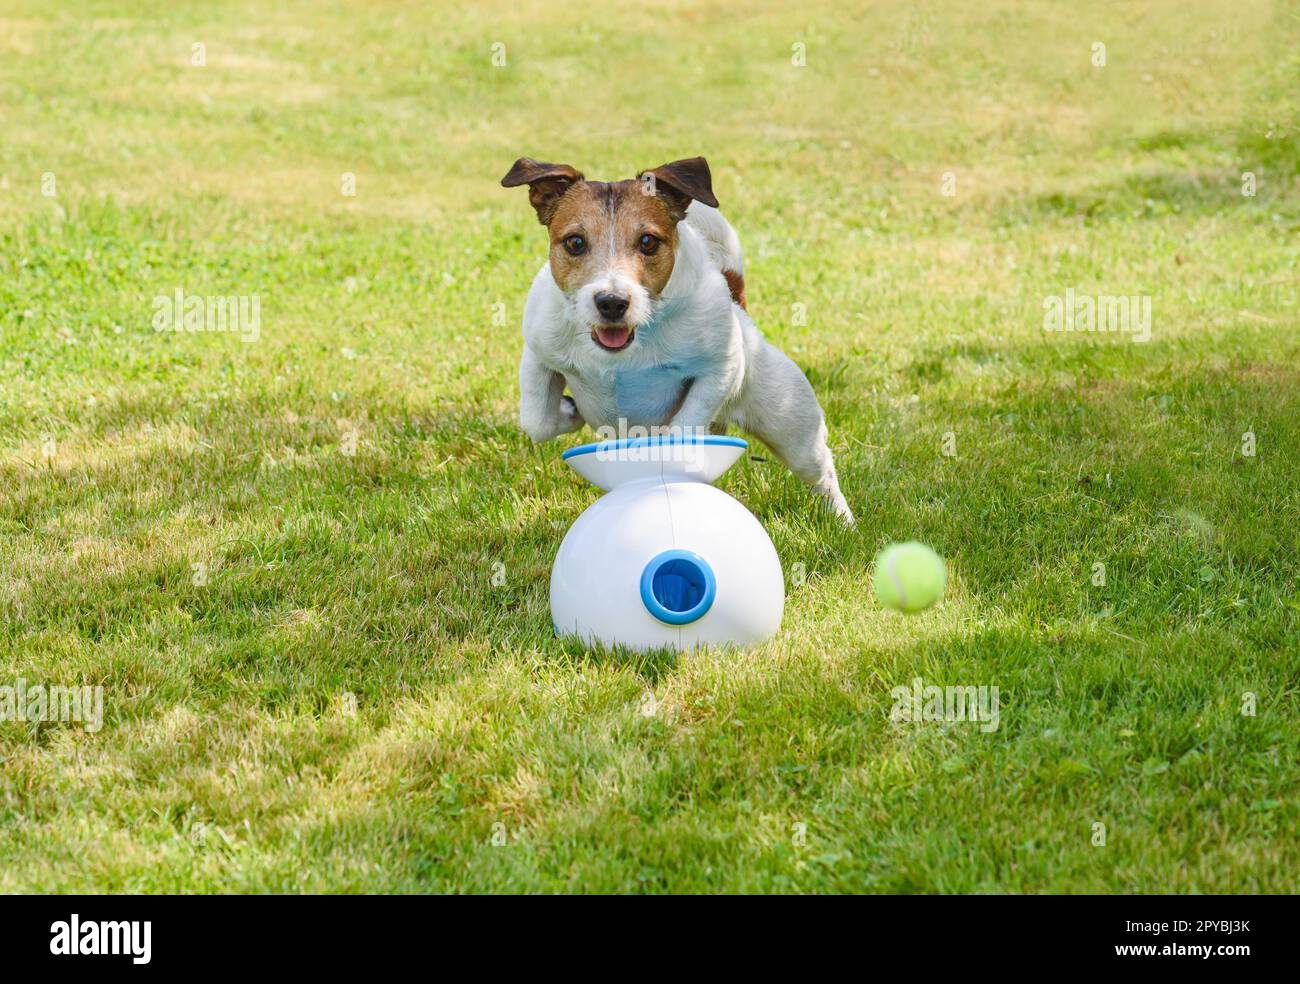 Dog playing with robot ball launcher. Funny dog chasing ball on green grass Stock Photo